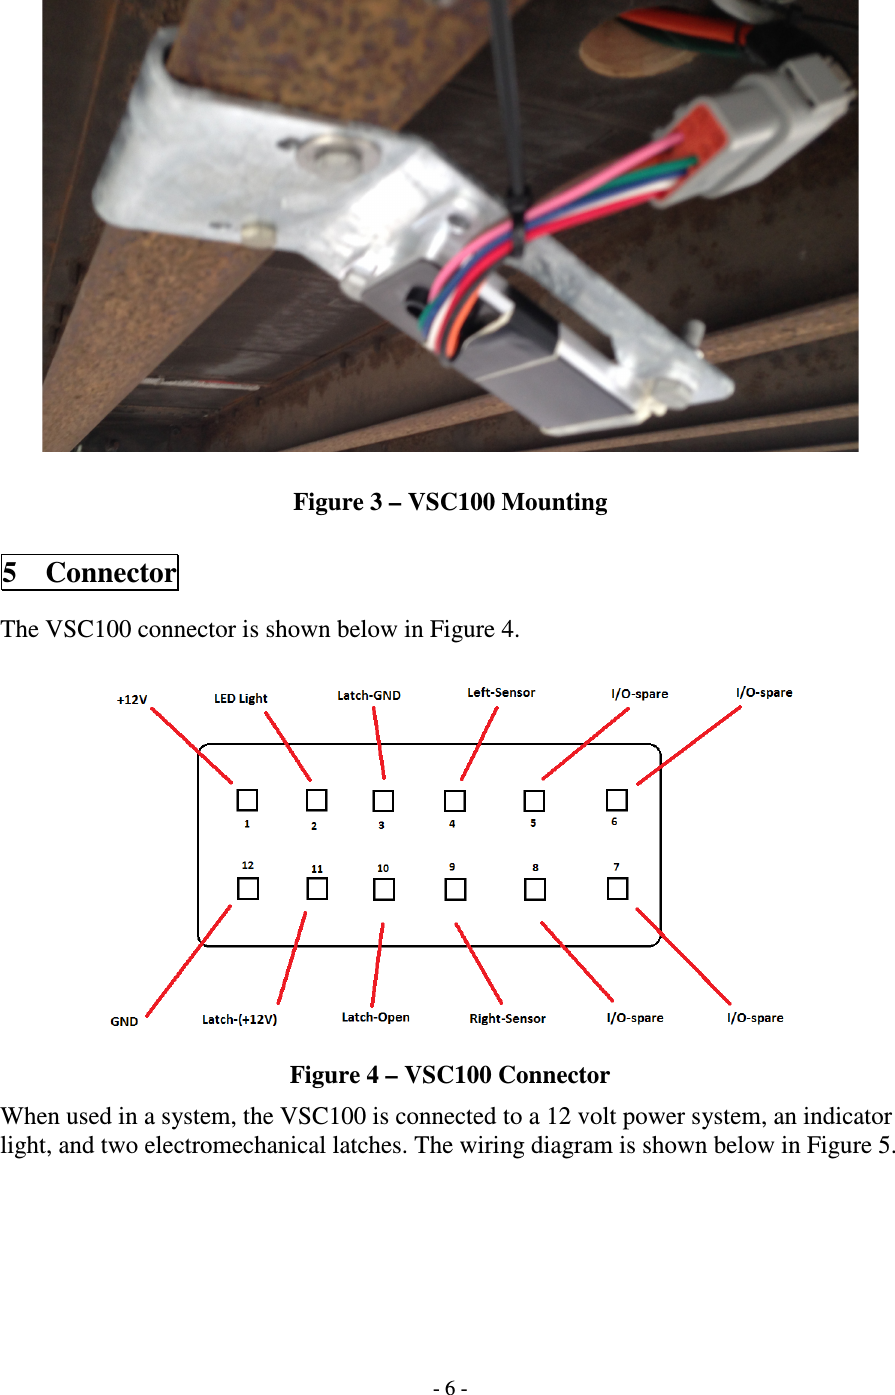   - 6 -    Figure 3 – VSC100 Mounting  5 Connector  The VSC100 connector is shown below in Figure 4.   Figure 4 – VSC100 Connector When used in a system, the VSC100 is connected to a 12 volt power system, an indicator light, and two electromechanical latches. The wiring diagram is shown below in Figure 5.  